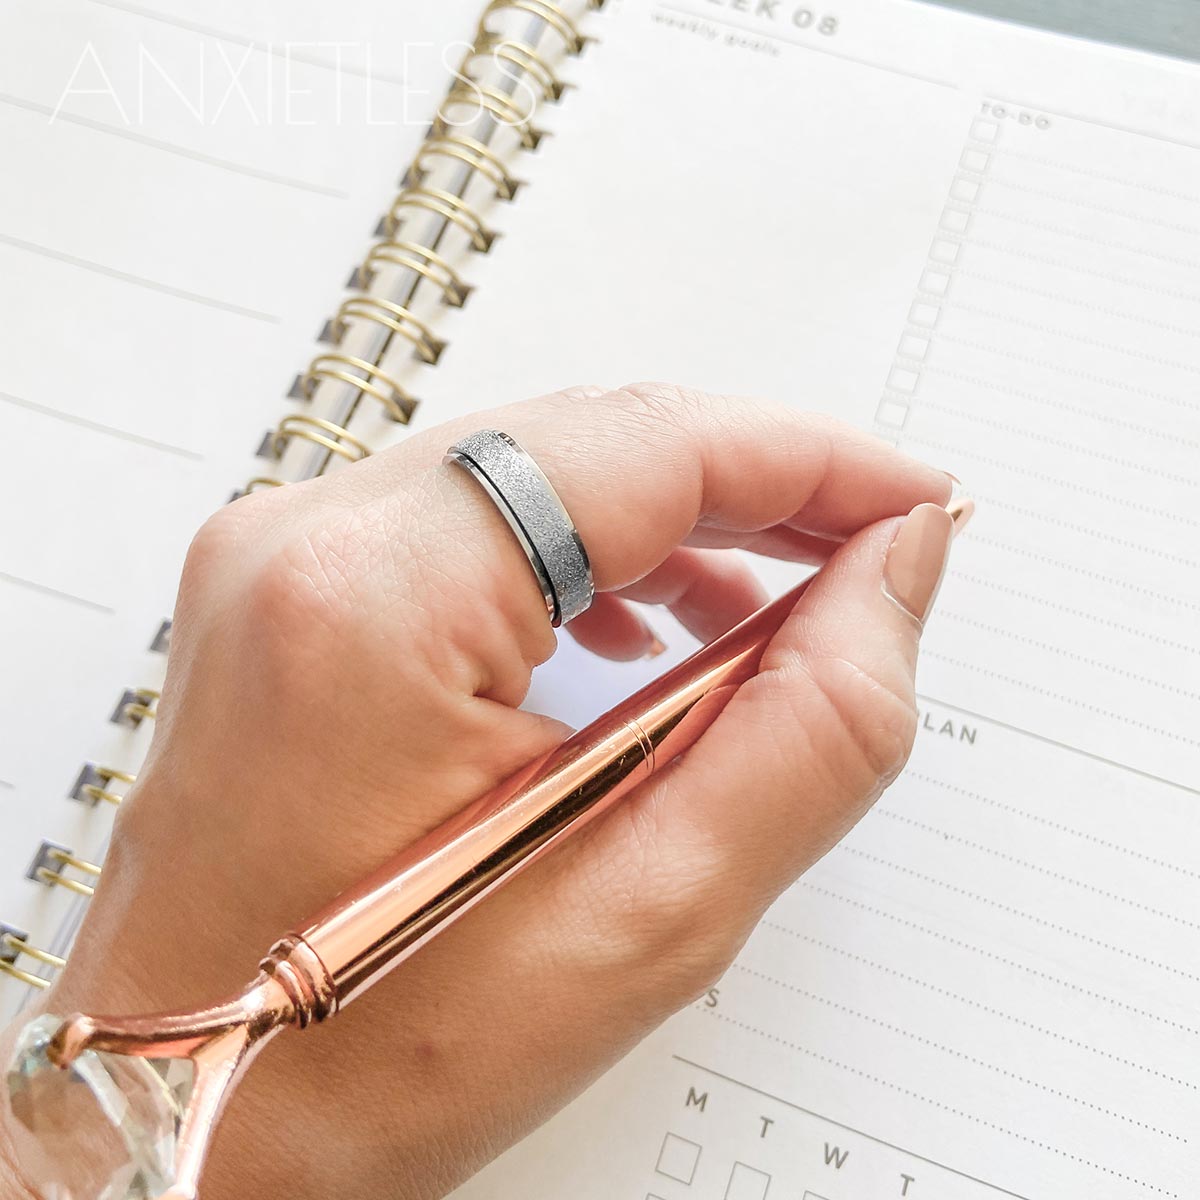 Woman Wearing Silver Anxiety Ring, Holding Rose Gold Pen, Writing in Diary